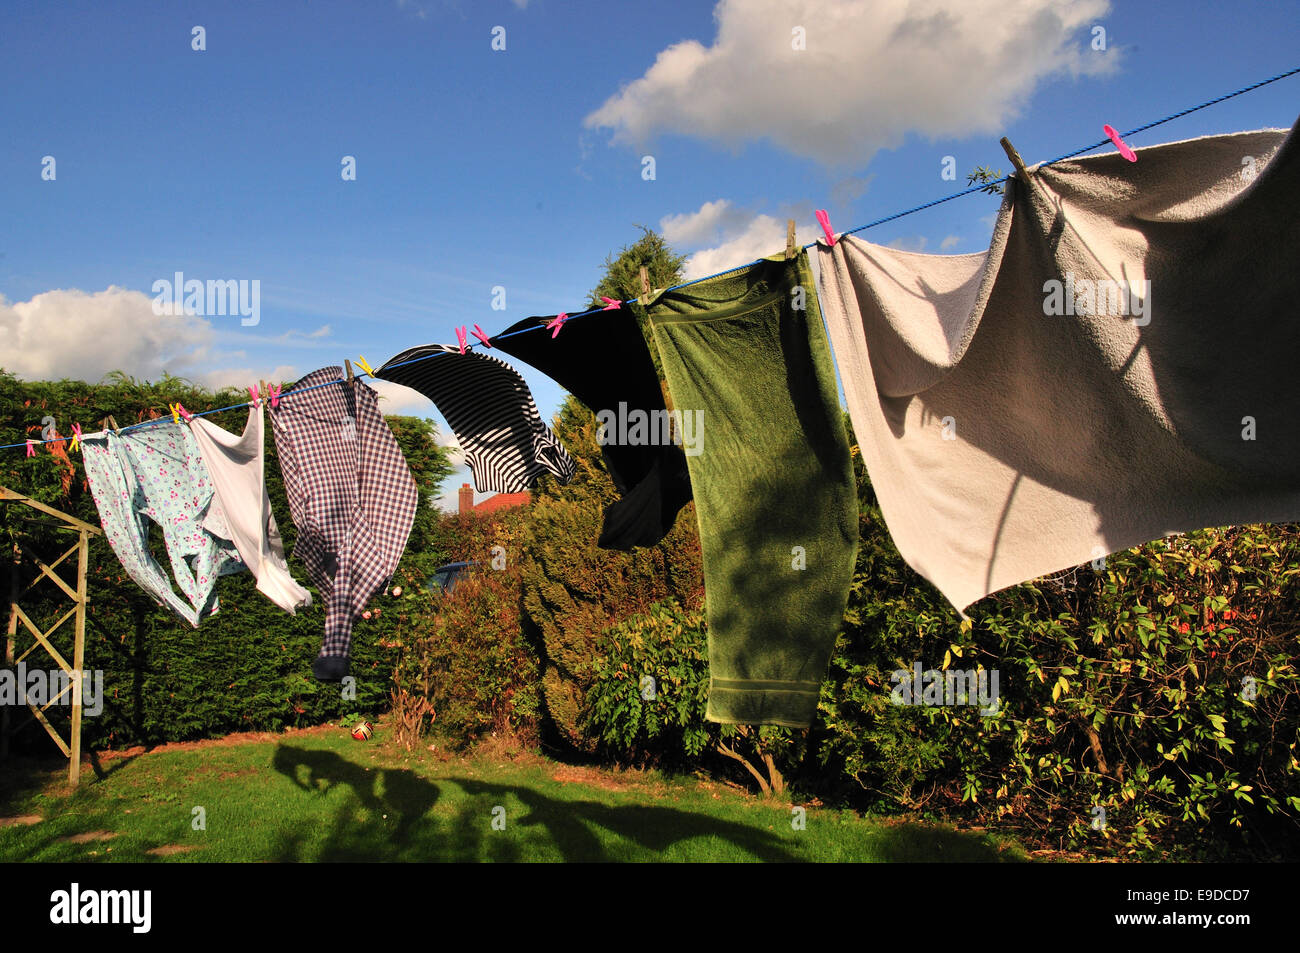 Line of washing blowing in the Wind Stock Photo